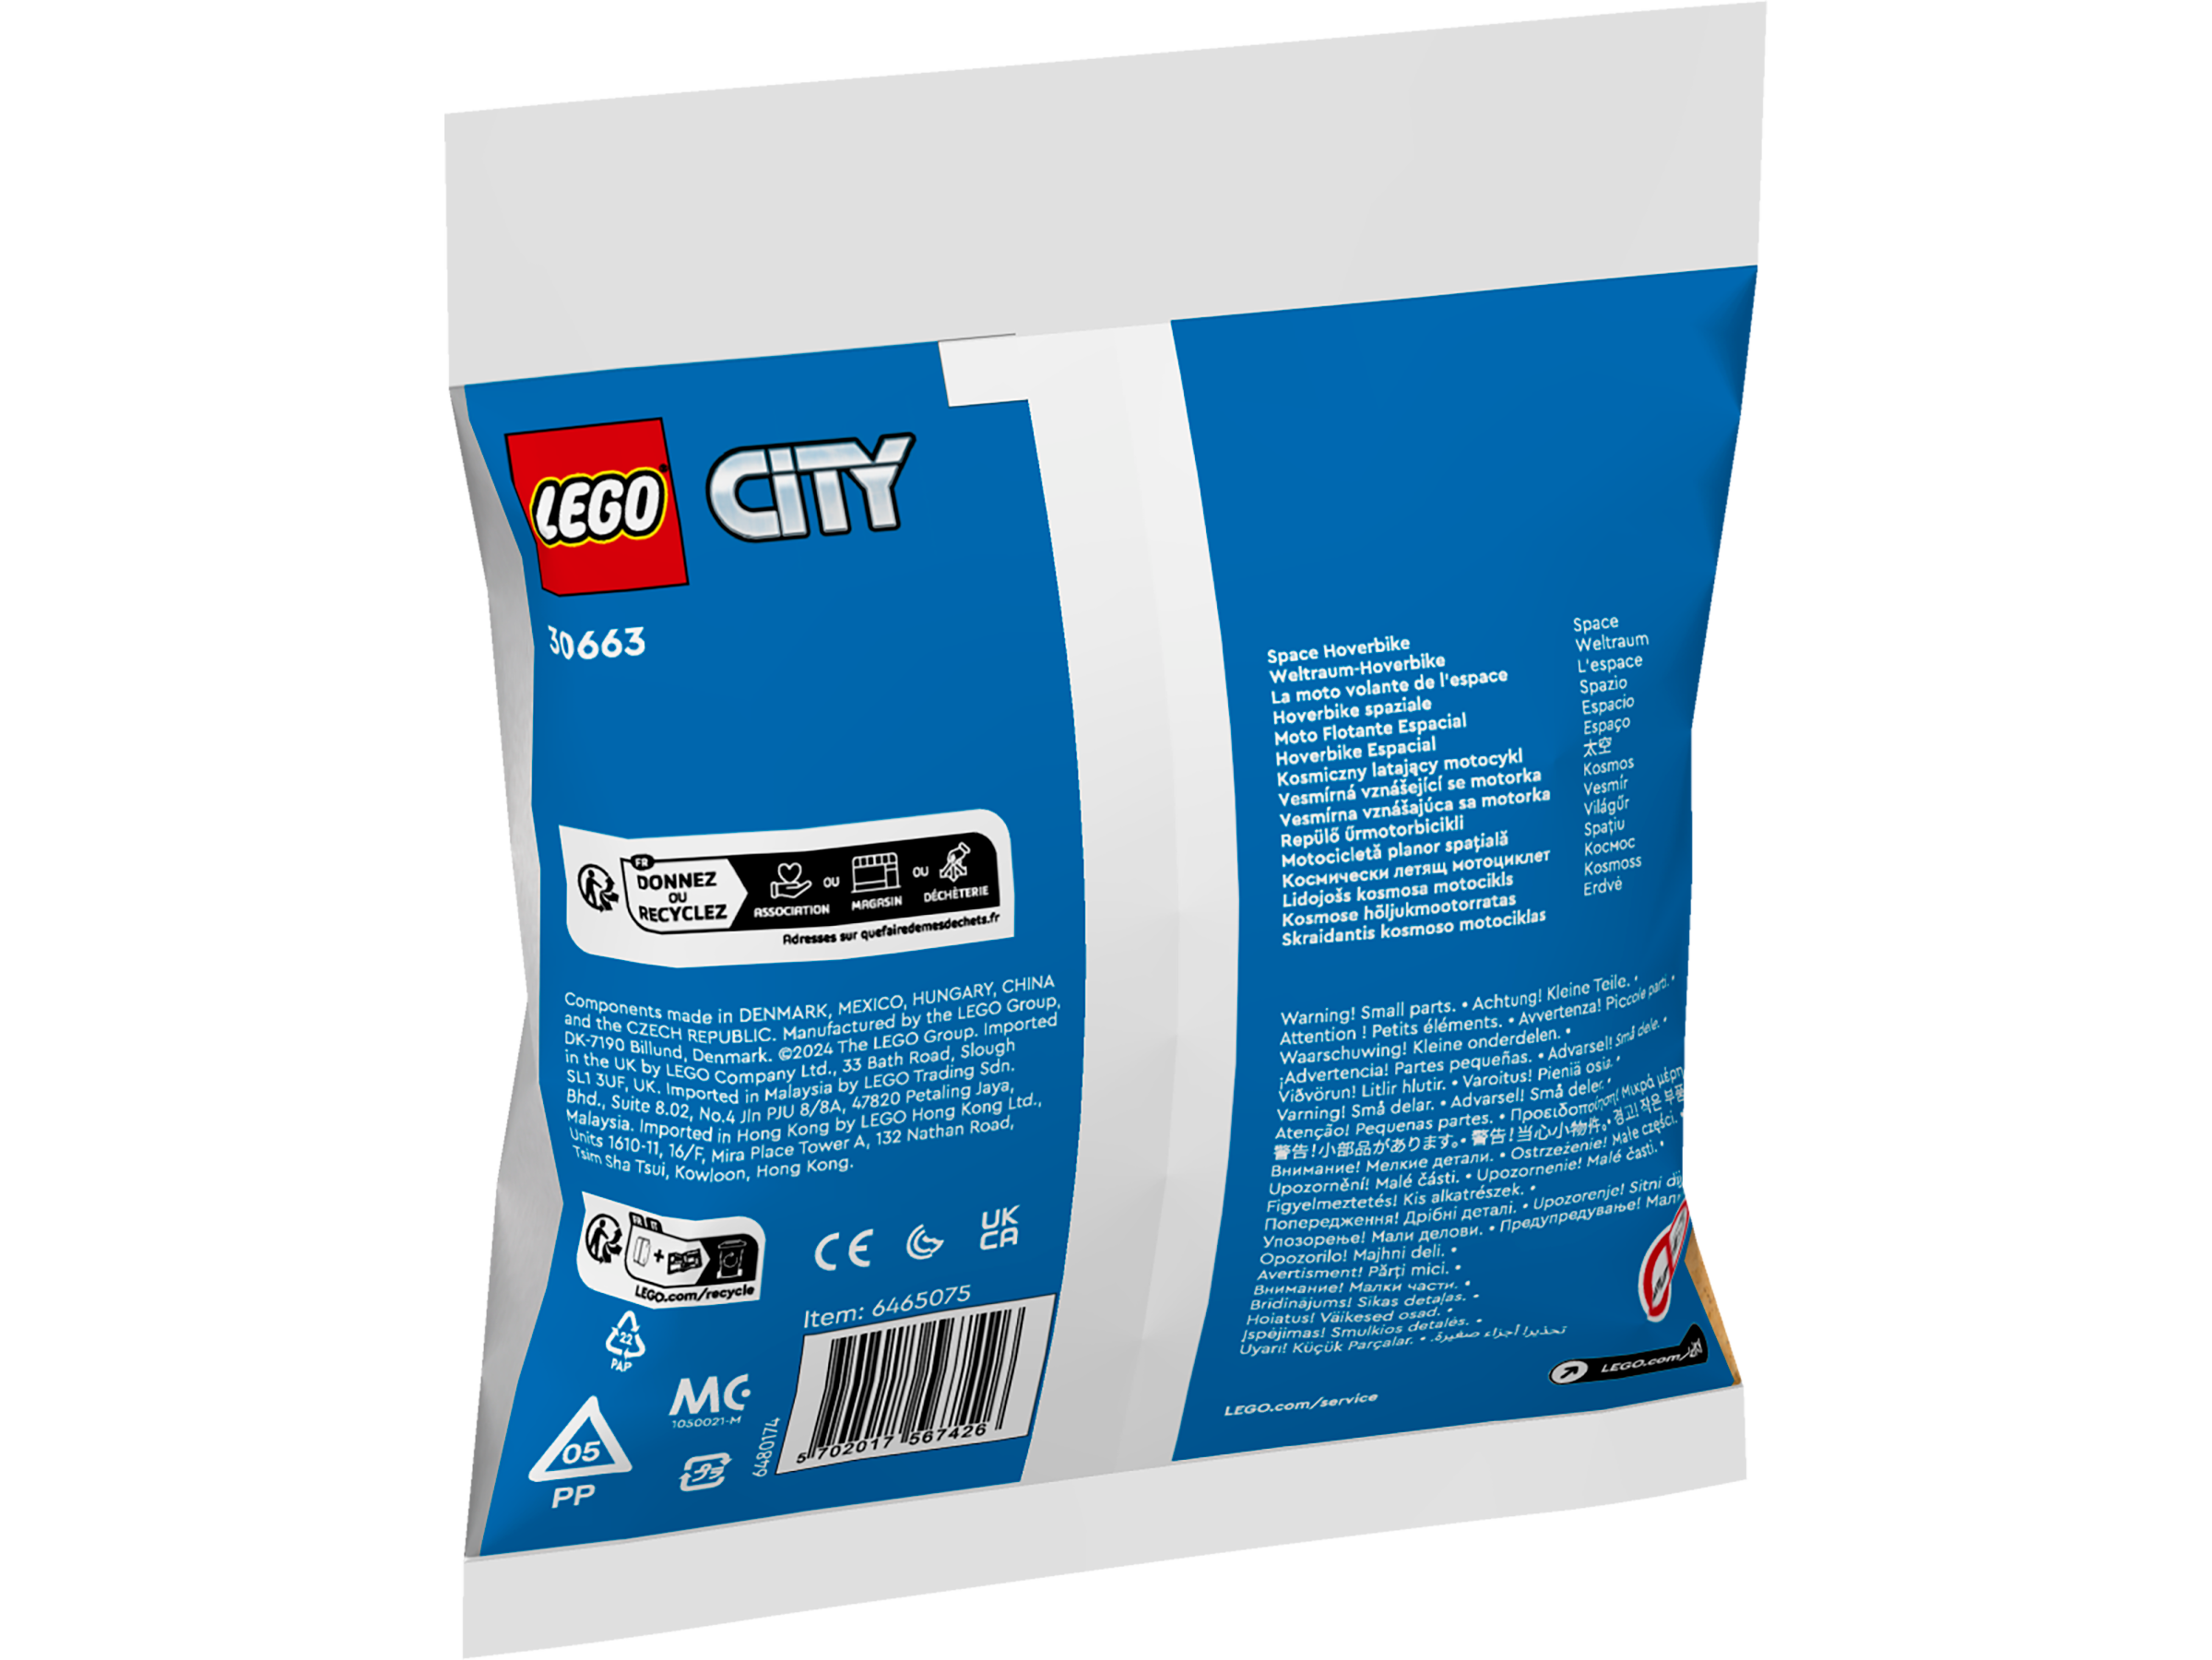 LEGO City 30663 Weltraum Hoverbike Polybag